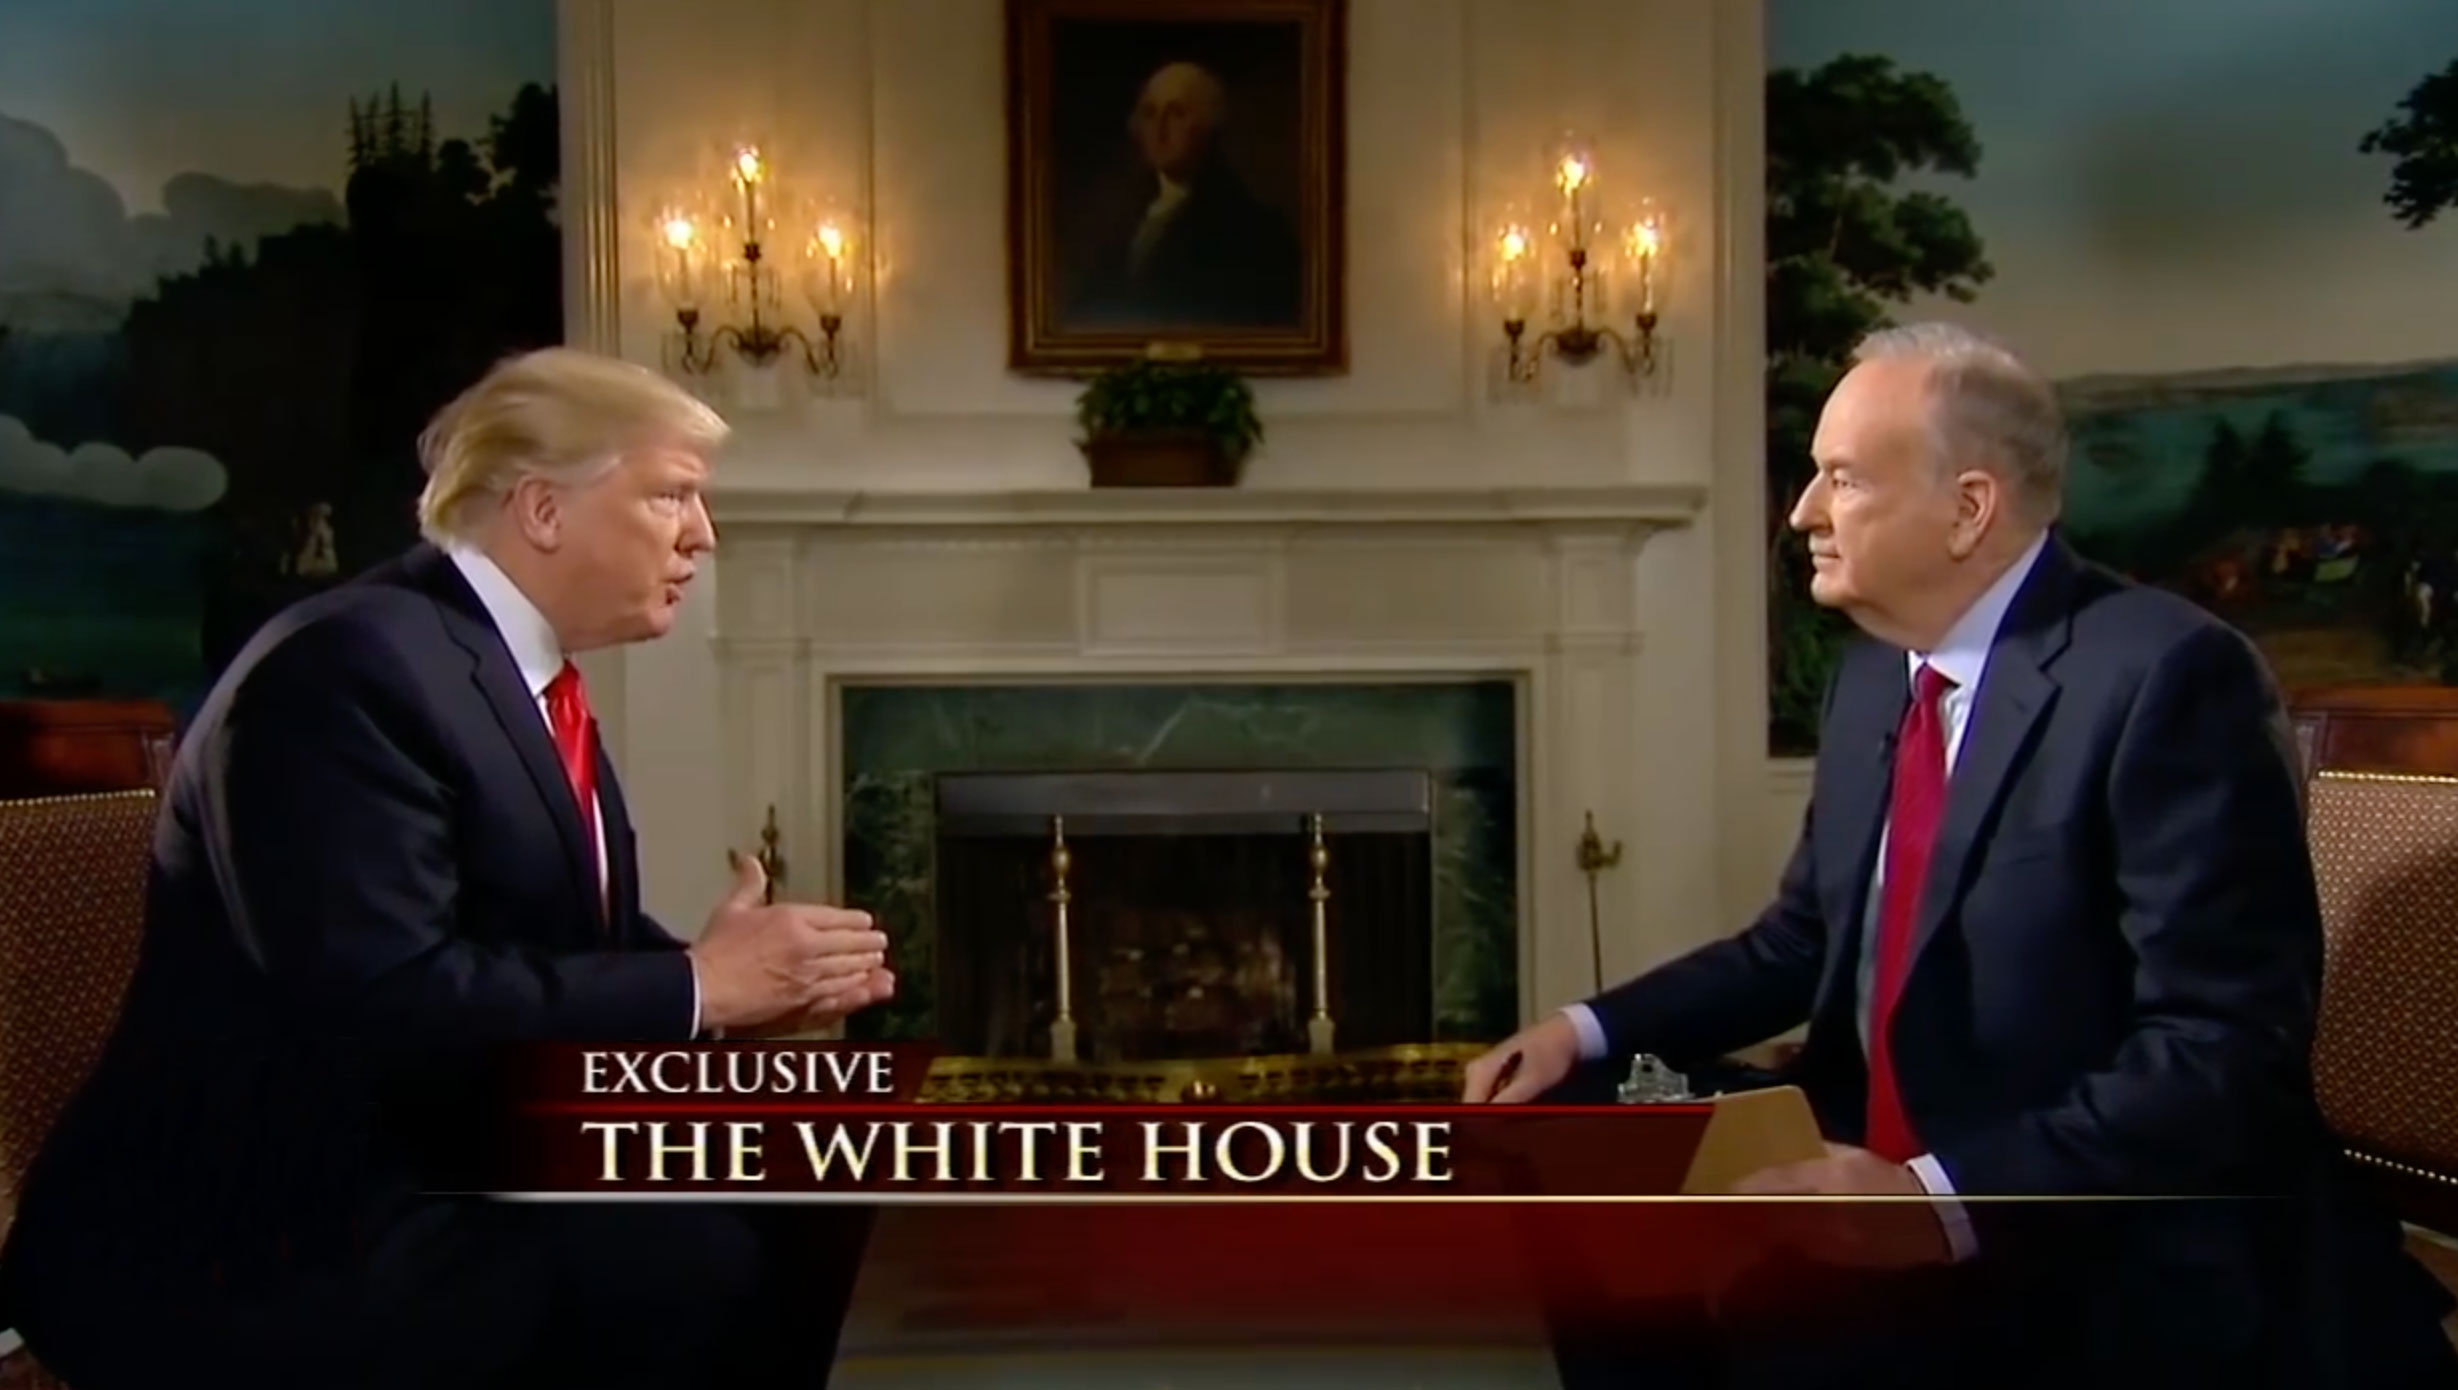 OPEN TO ALL - President's Day Special: Best of O'Reilly's Trump and Obama Interviews